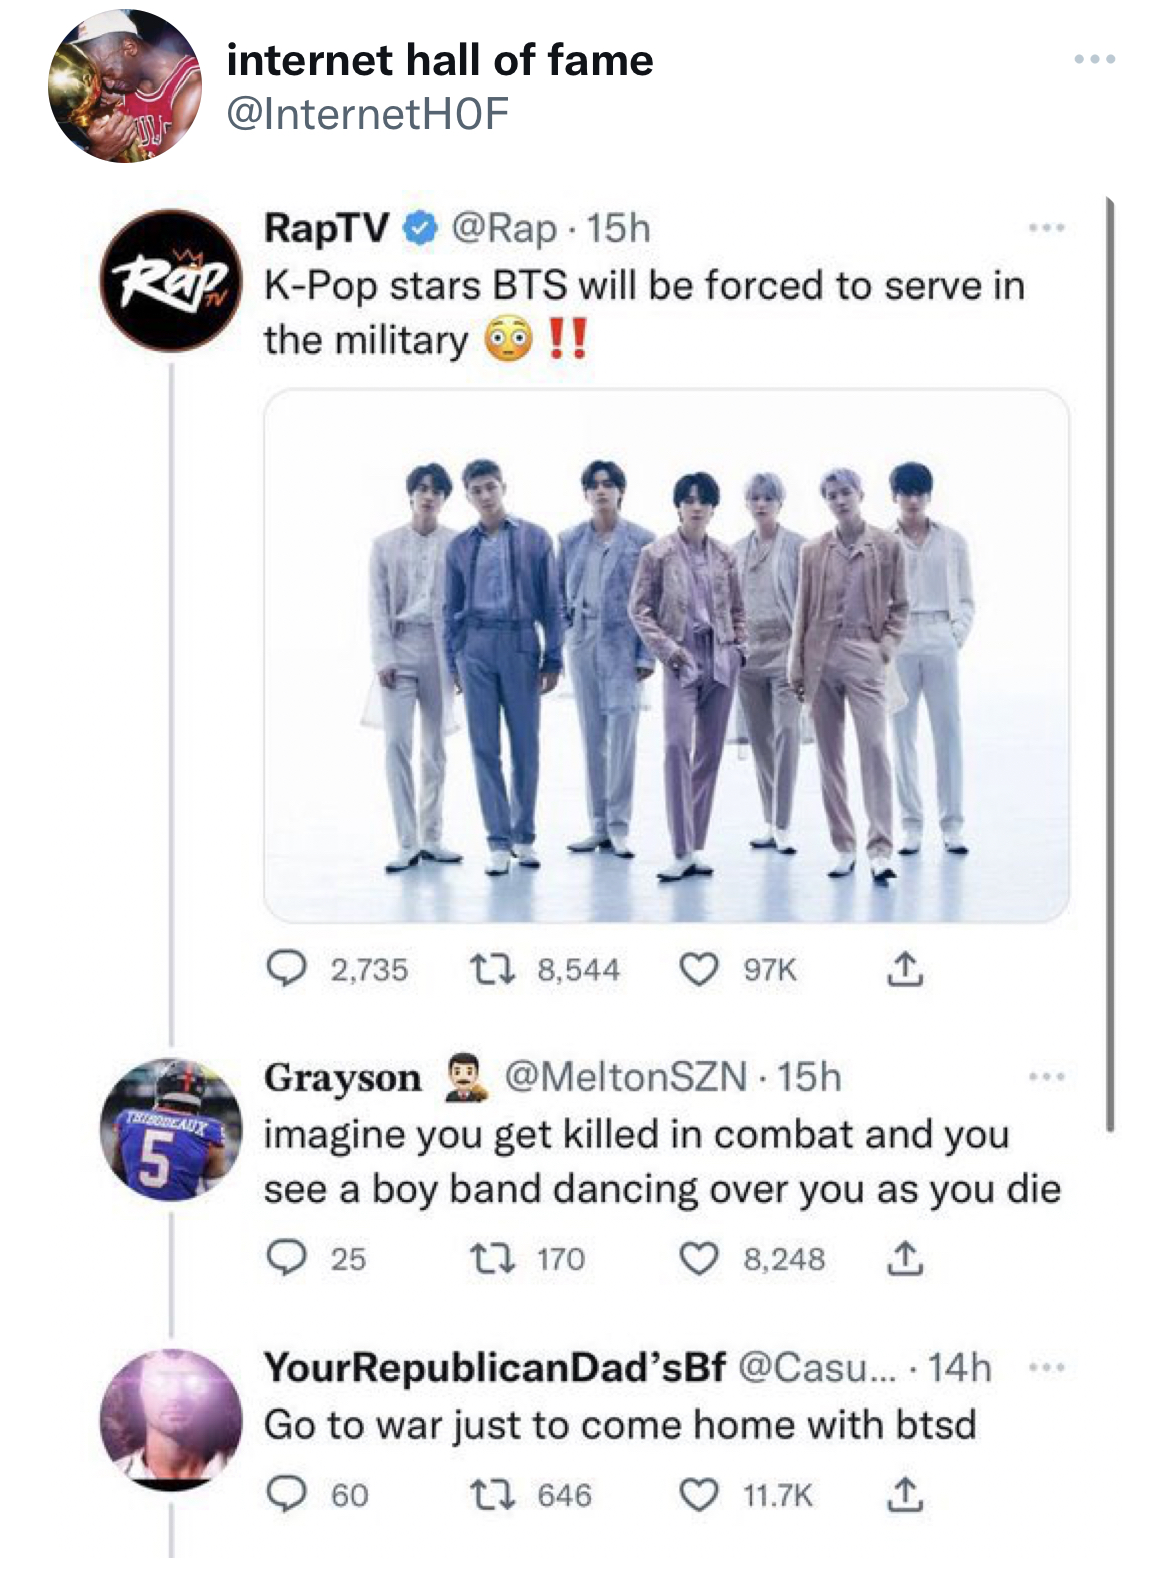 Savage and hilarious tweets - bts 2022 - internet hall of fame RapTV Rap KPop stars Bts will be forced to serve in the military !! 5 2,735 18, Grayson 15h imagine you get killed in combat and you see a boy band dancing over you as you die 12 170 8.248 1 2